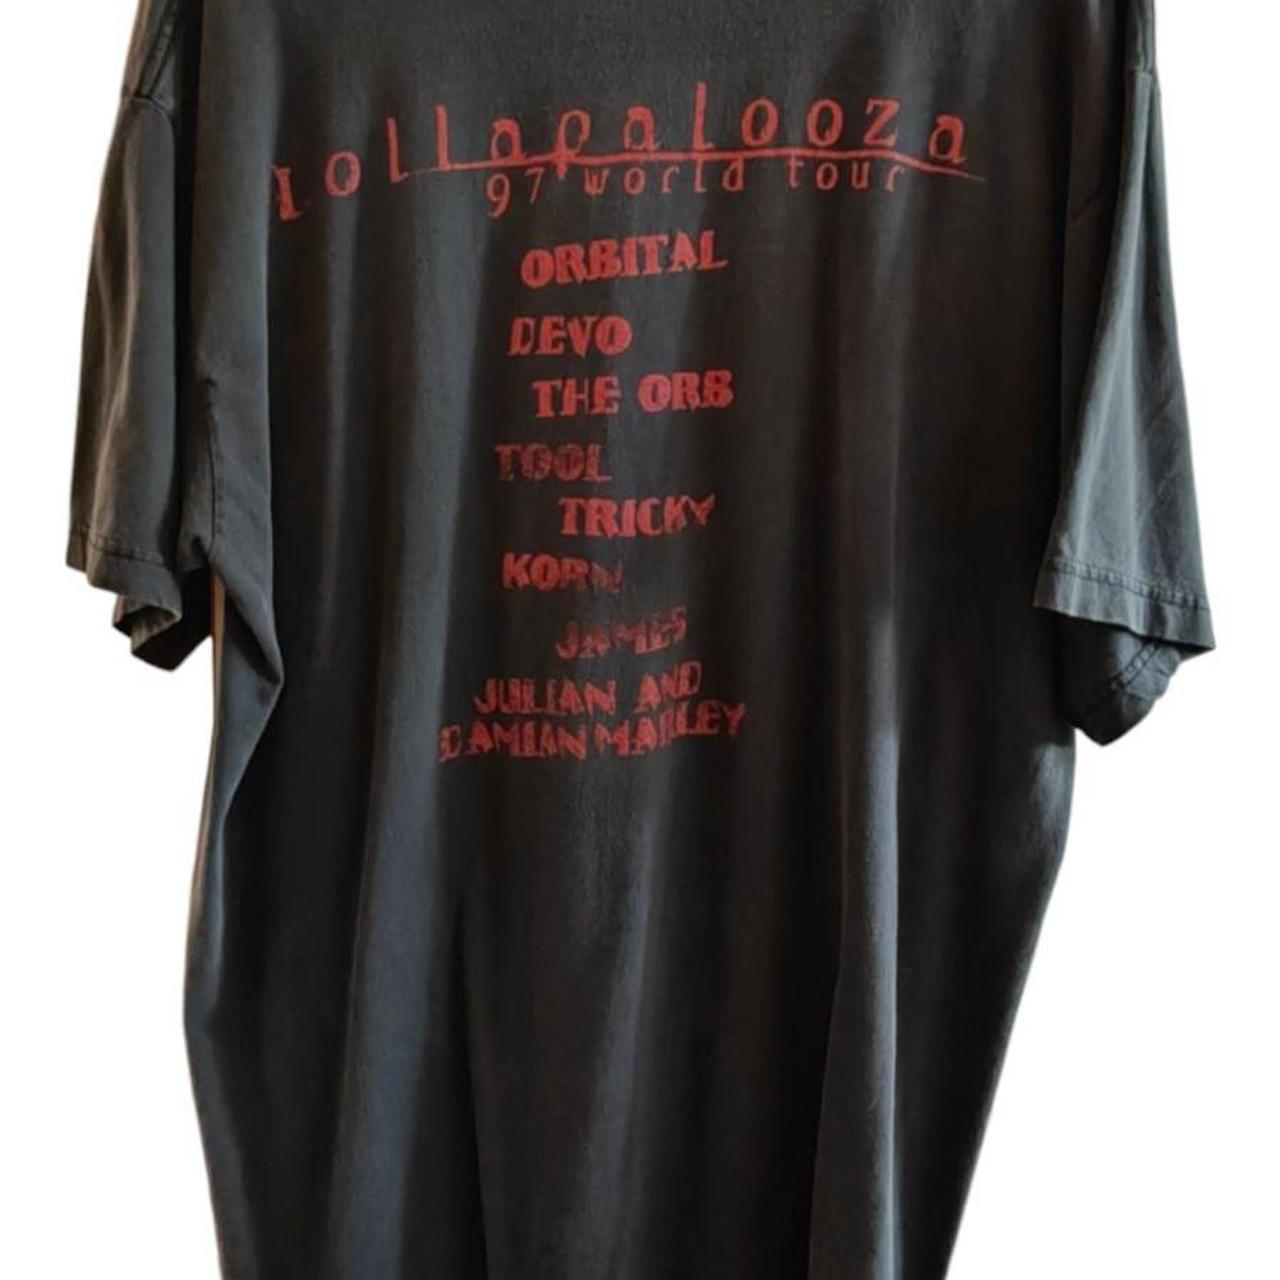 Vintage 1997 lollapalooza t shirt., Giant tag. Tagged...